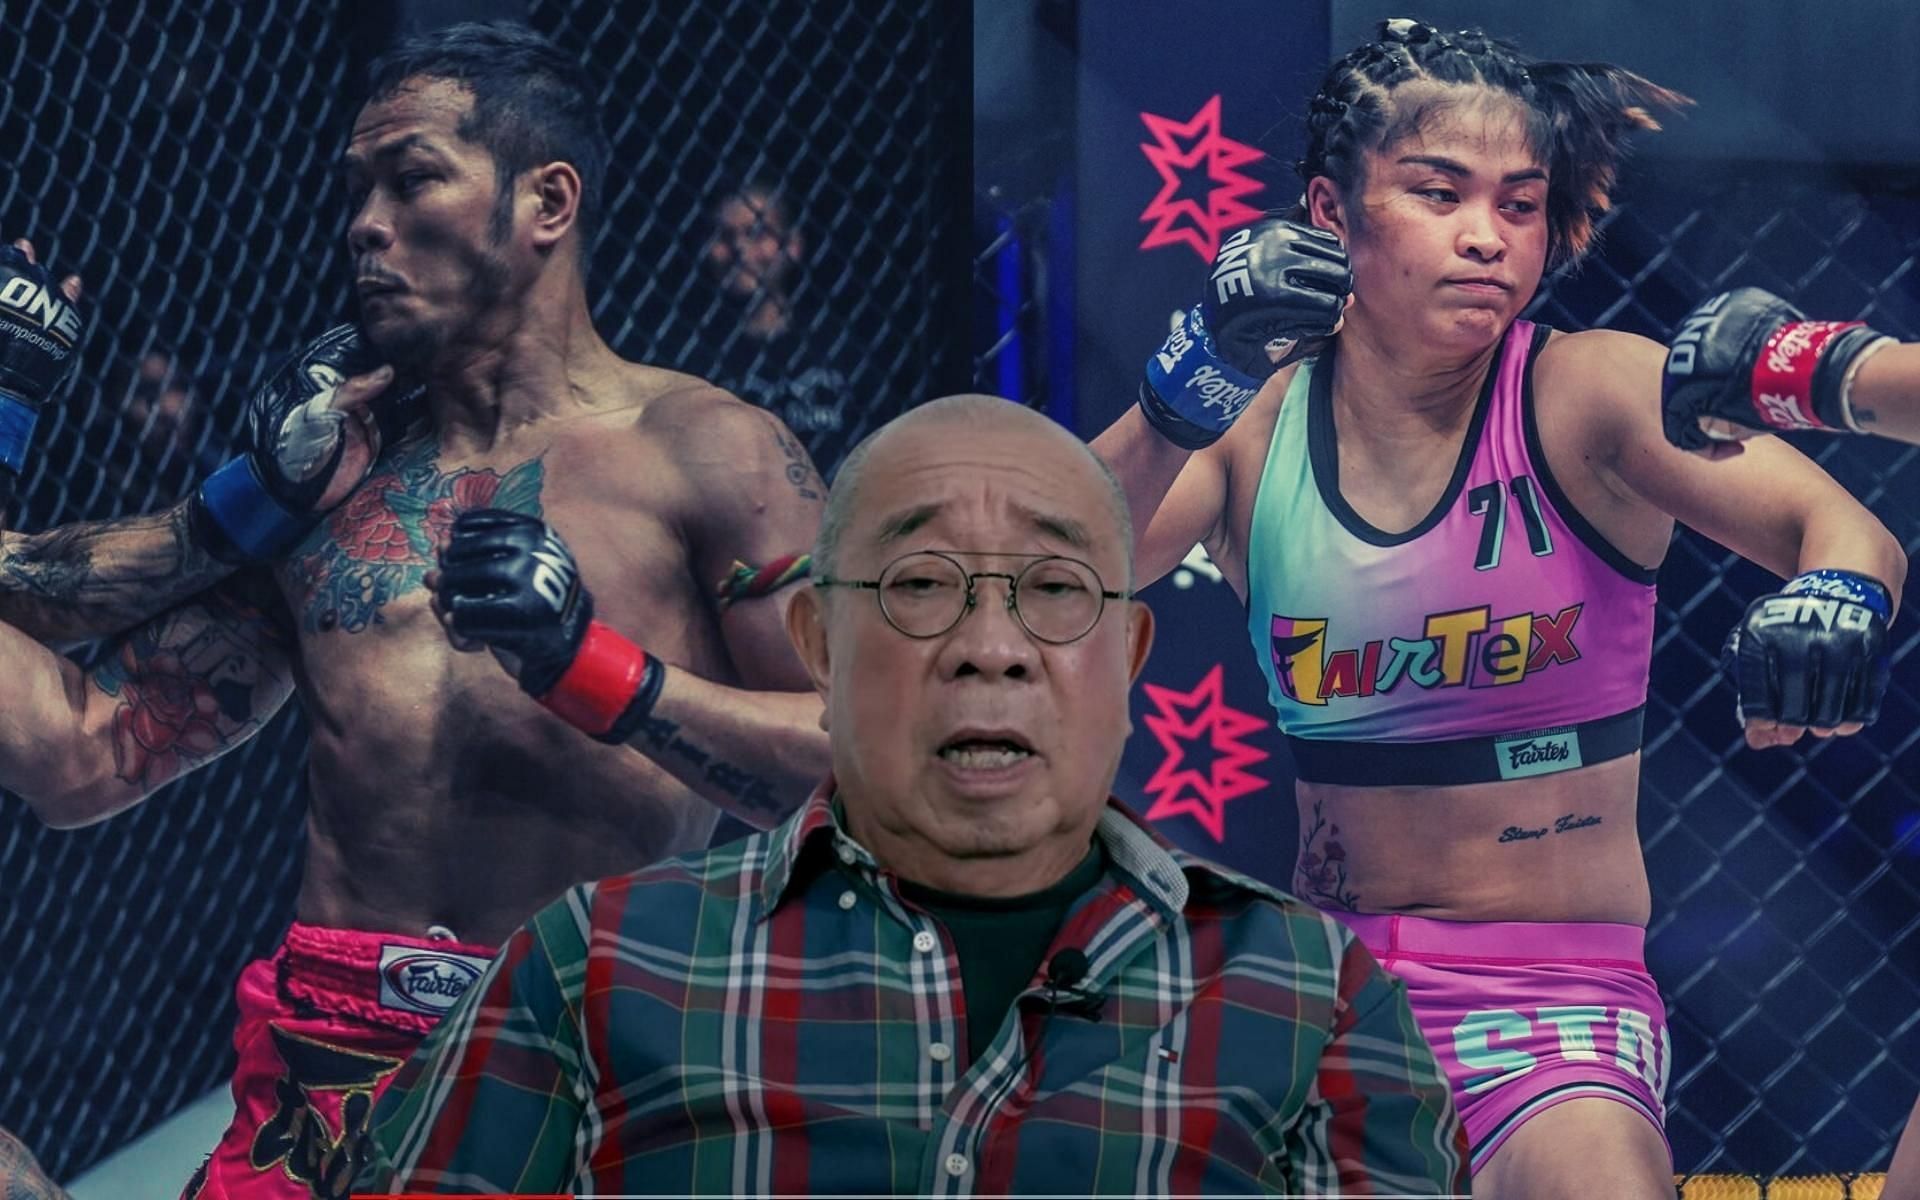 Fairtex Training Center founder Mr. Philip Wong (center) talks about his fighters Yodsanklai (left) Stamp (right). (Images courtesy: ONE Championship, Fairtext Training Center&#039;s YouTube channel)